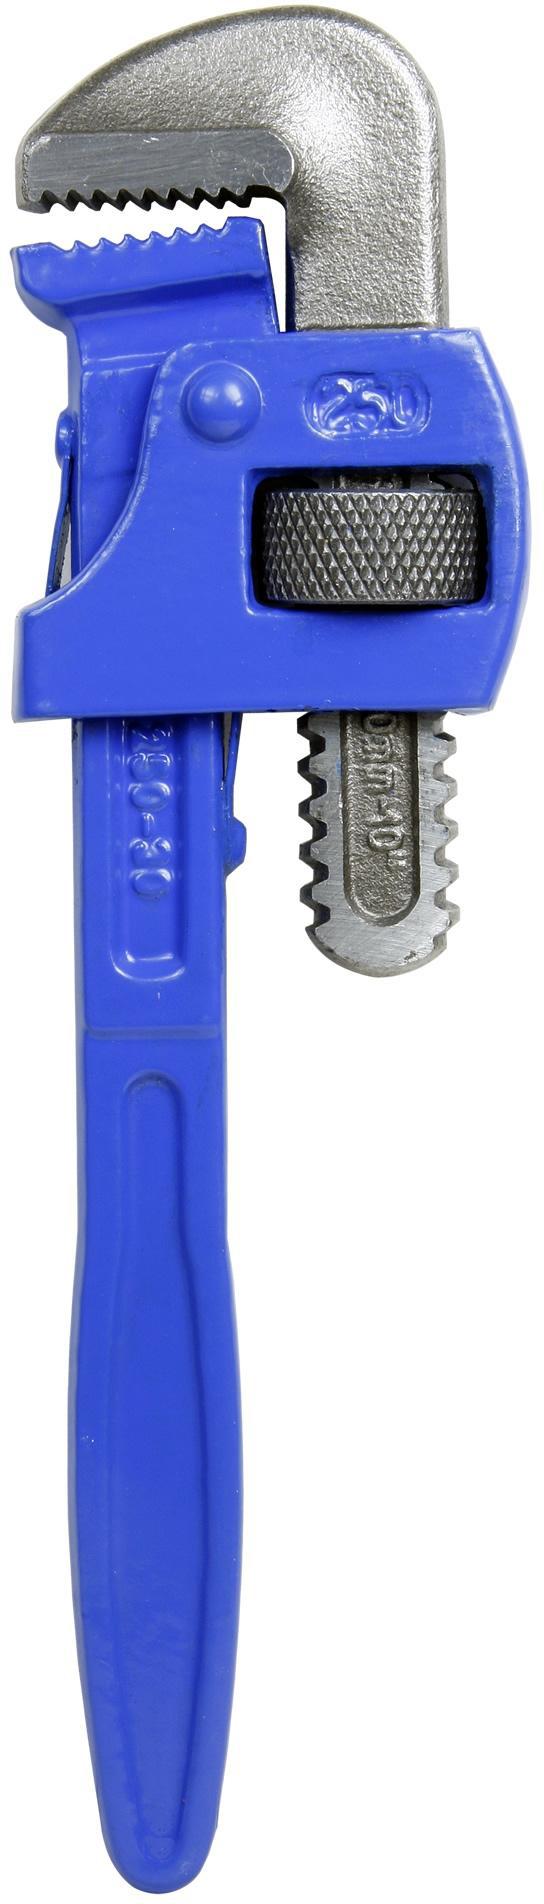 Halfords Adjustable Pipe Wrench 250Mm